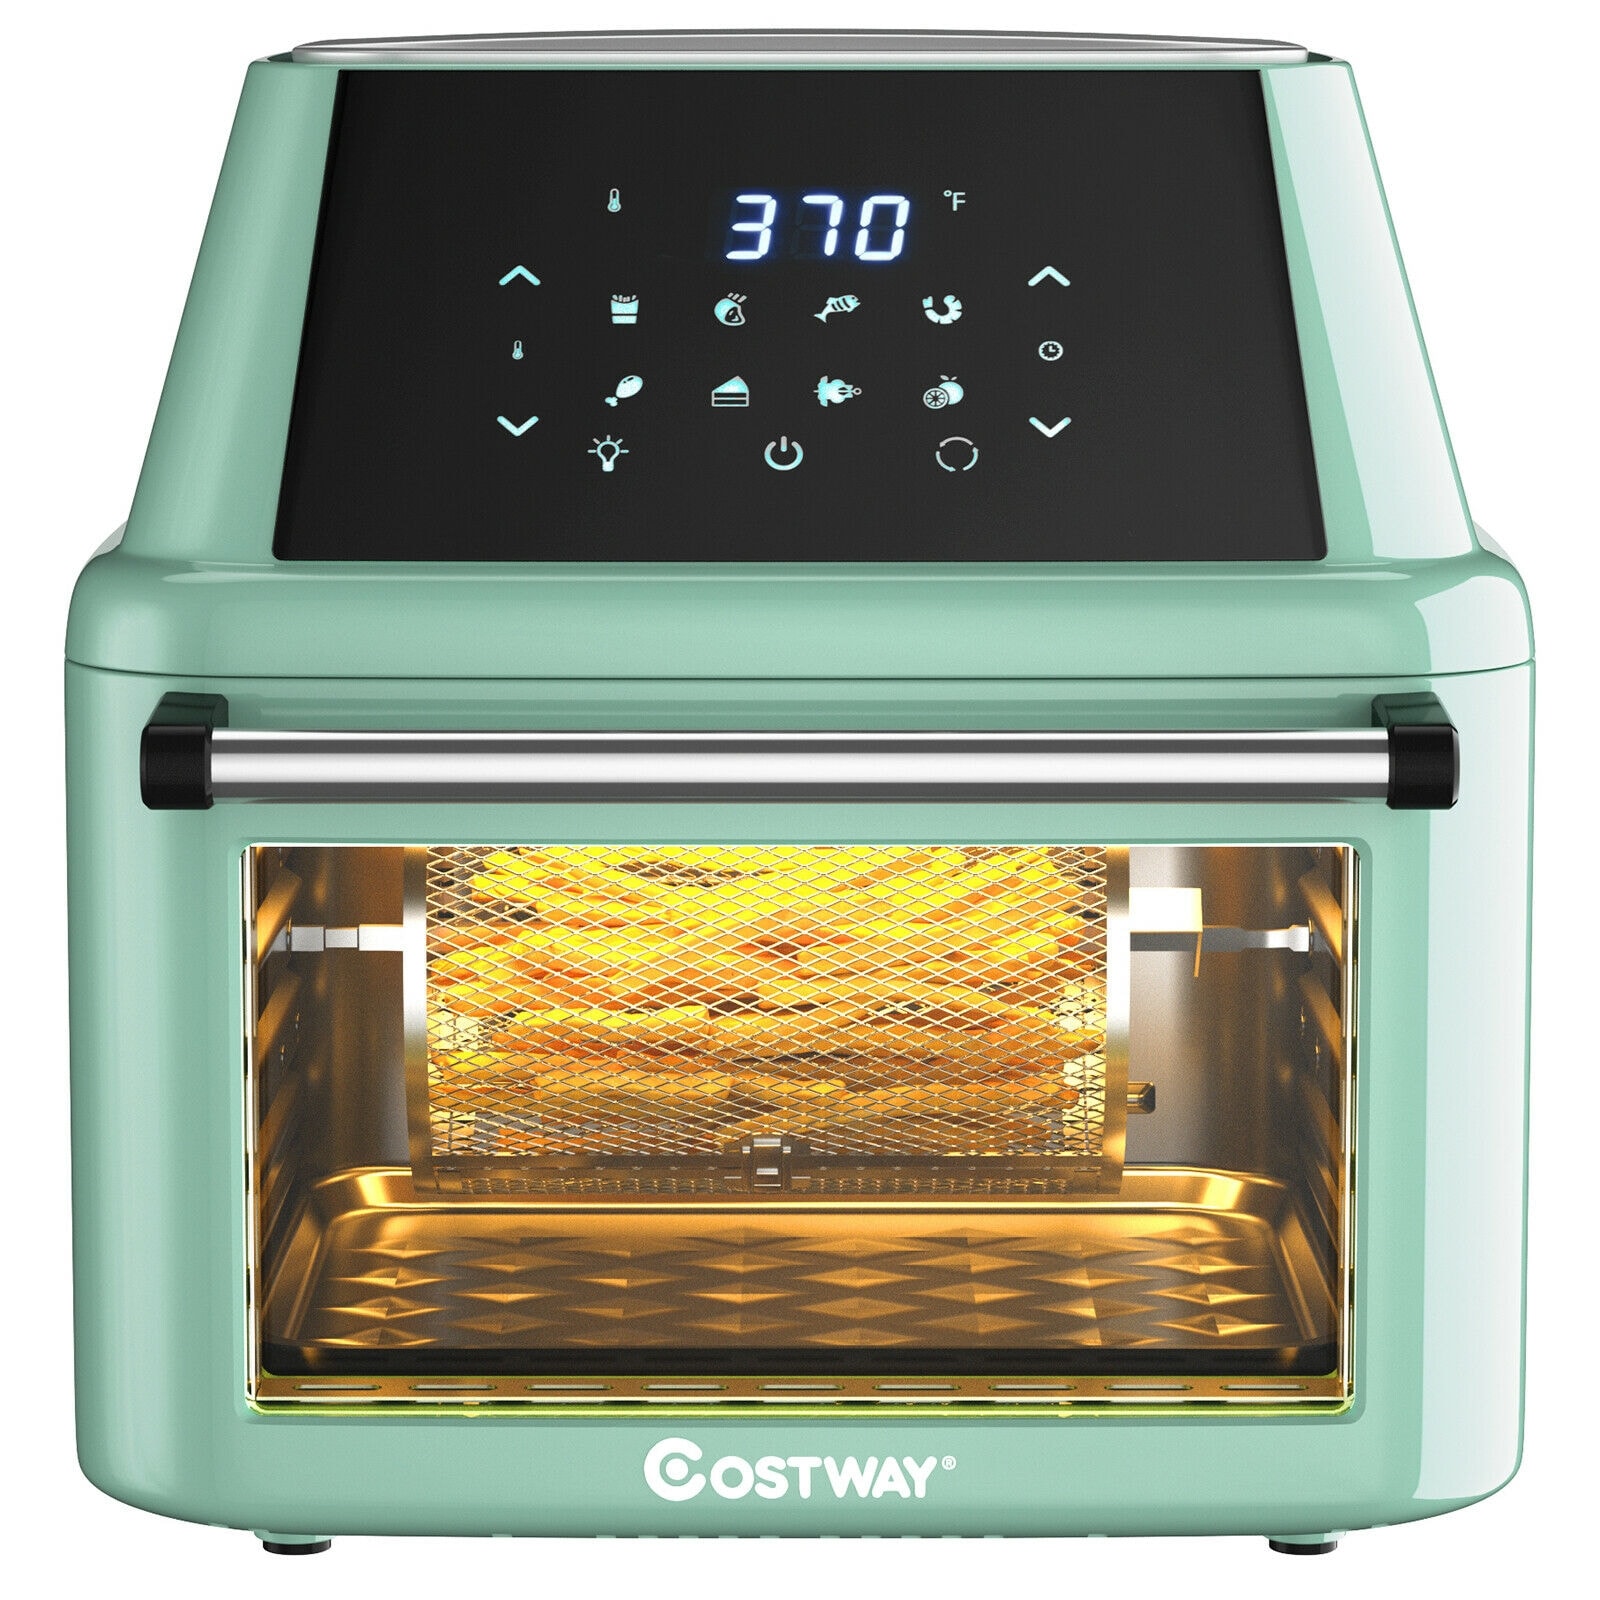 Topbuy 1800W 19qt Multi-functional Electric Air Fryer Oven Green